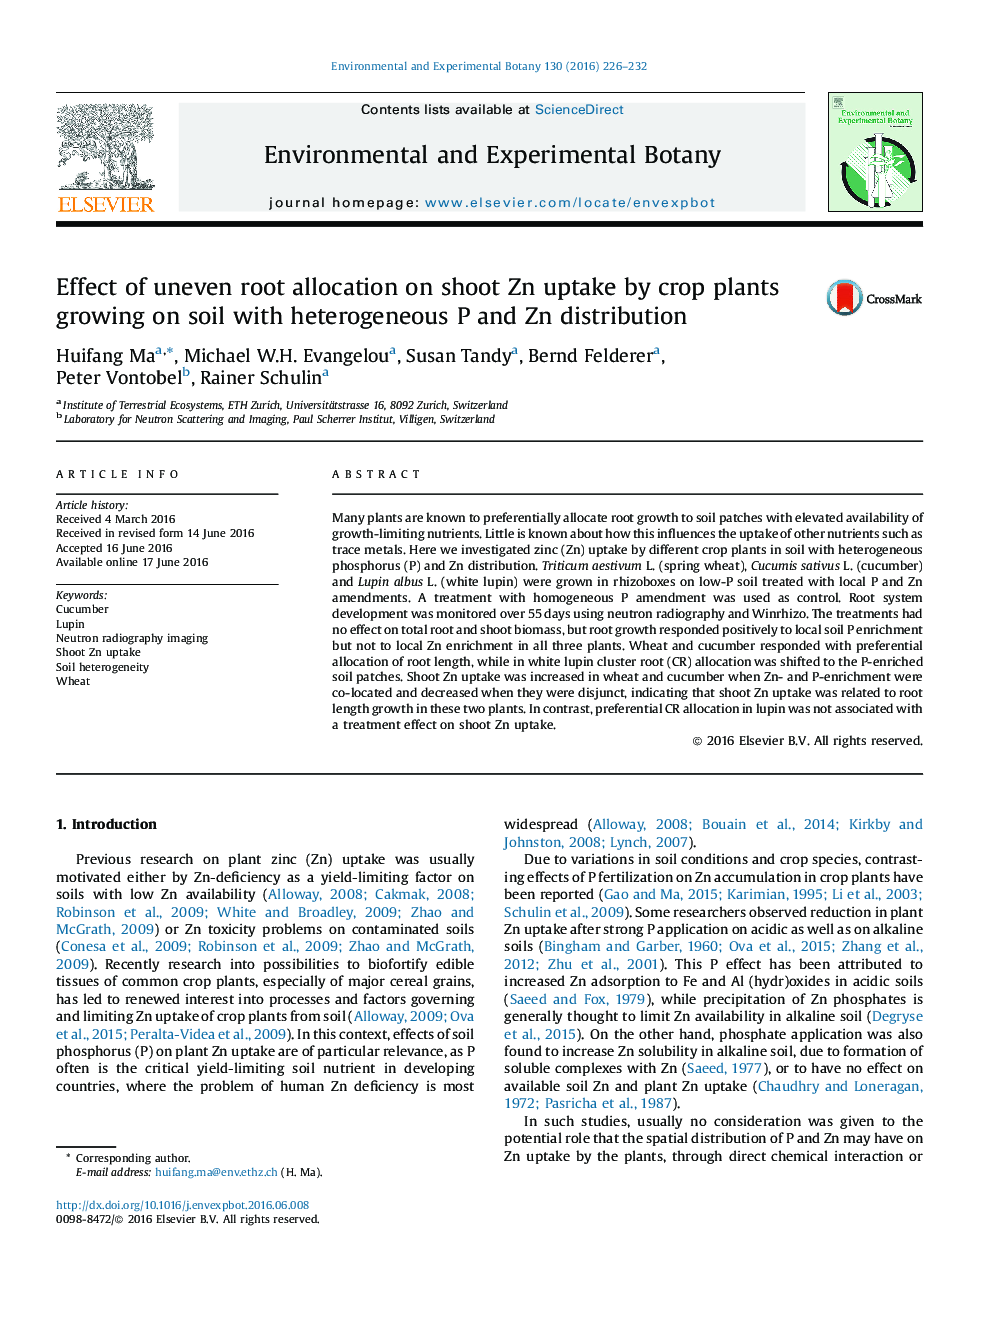 Effect of uneven root allocation on shoot Zn uptake by crop plants growing on soil with heterogeneous P and Zn distribution